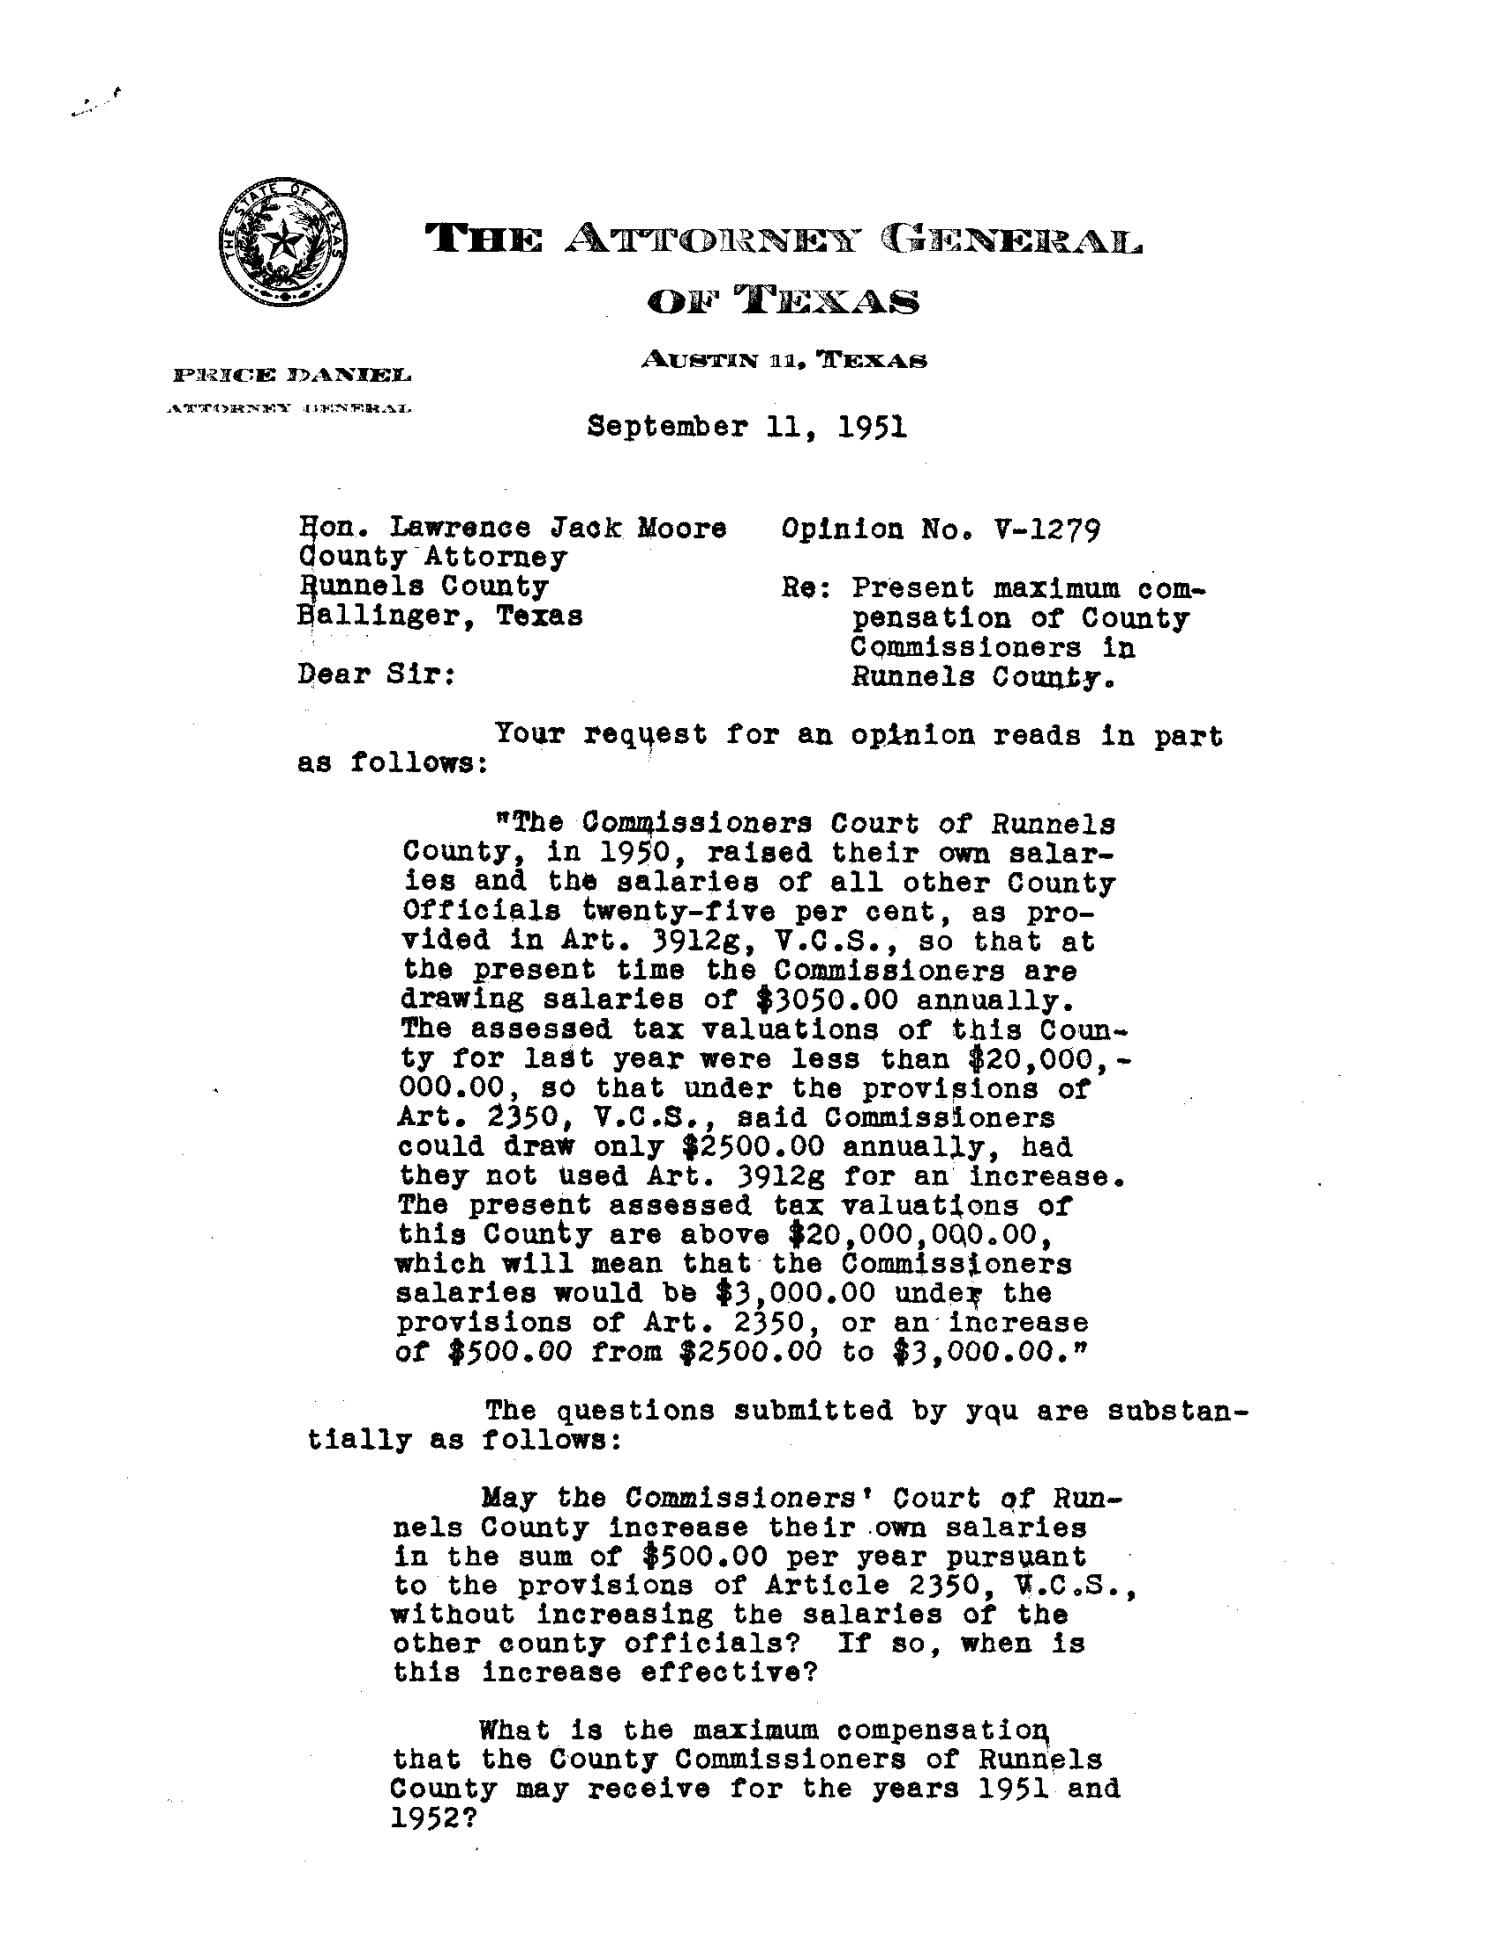 Texas Attorney General Opinion: V-1279
                                                
                                                    [Sequence #]: 1 of 4
                                                